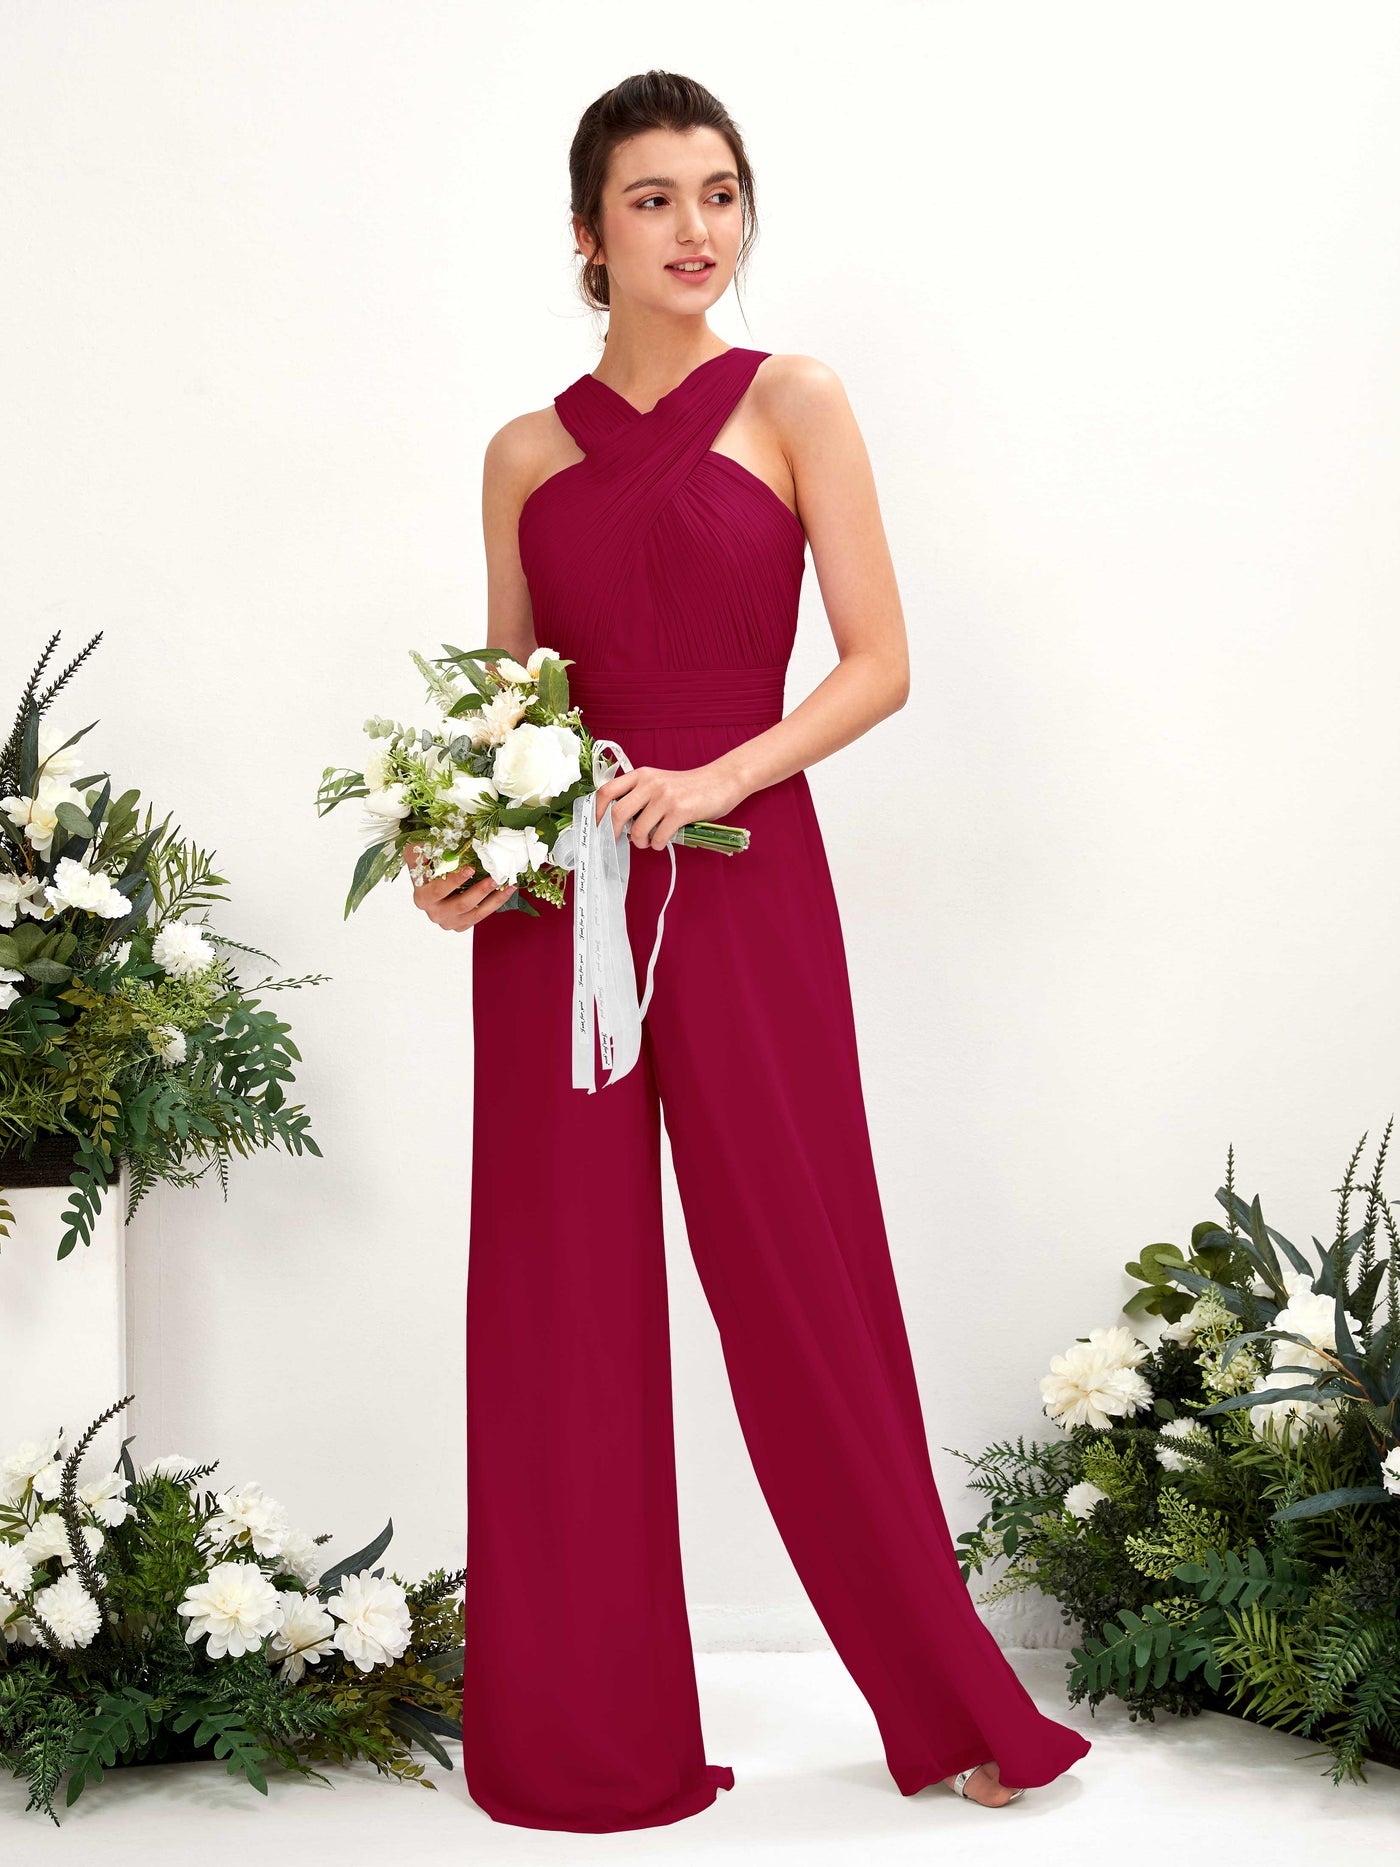 Jester Red Bridesmaid Dresses Bridesmaid Dress Chiffon V-neck Full Length Sleeveless Wedding Party Dress (81220741)#color_jester-red